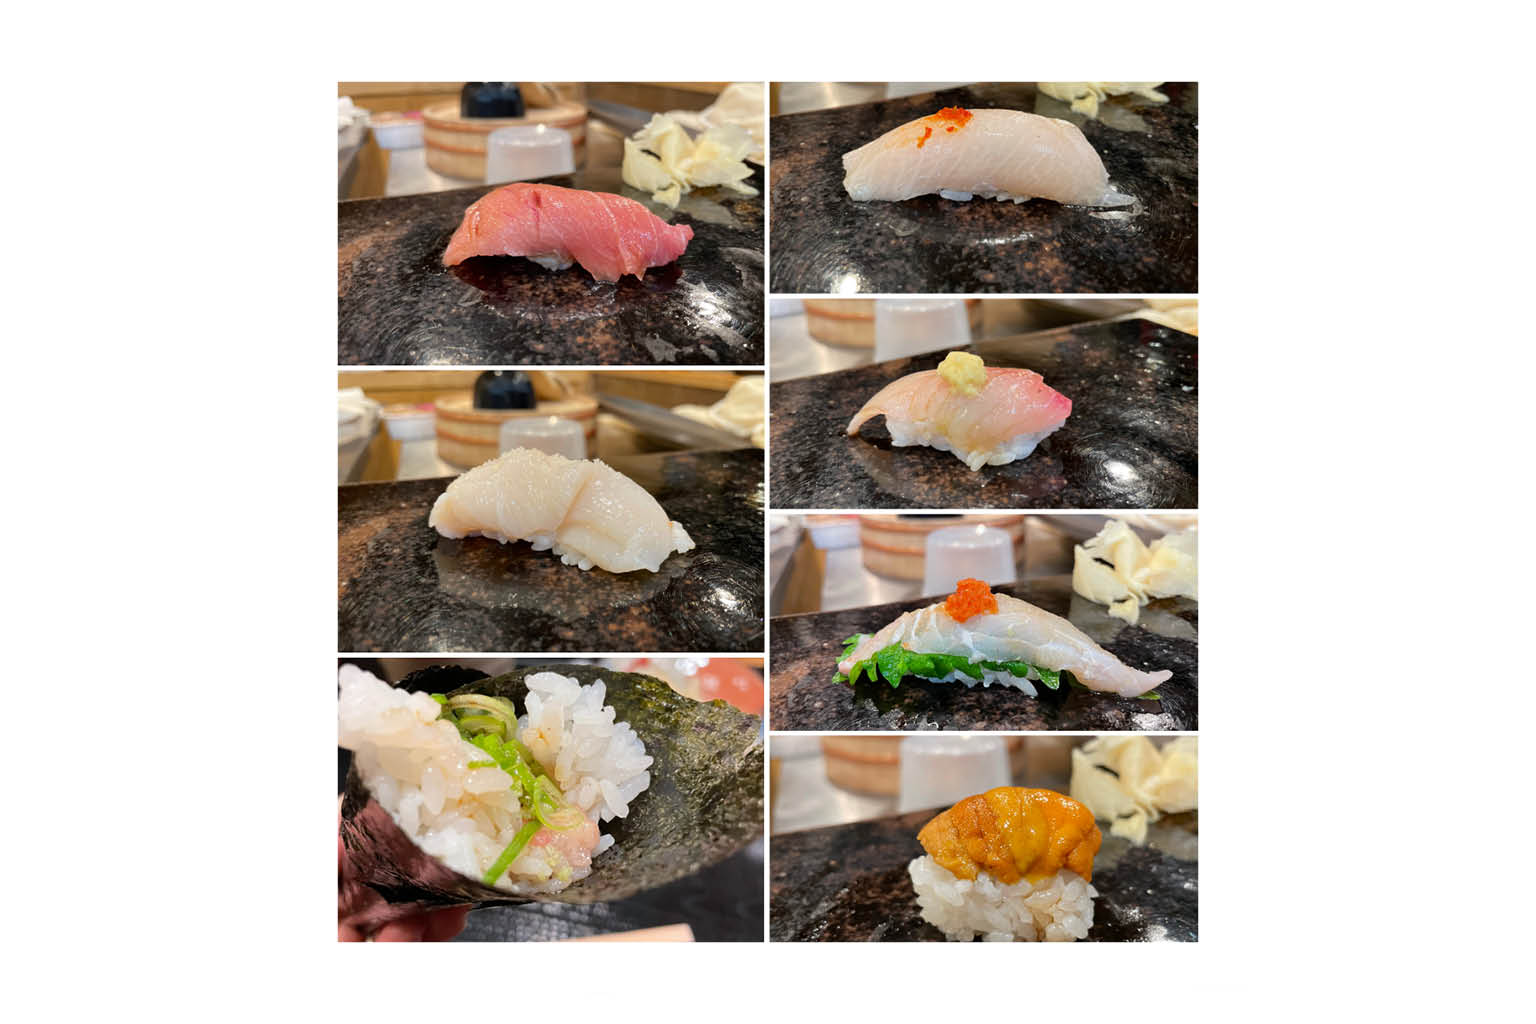 Seven-course meal at an omakase in Industry City, Brooklyn, New York.